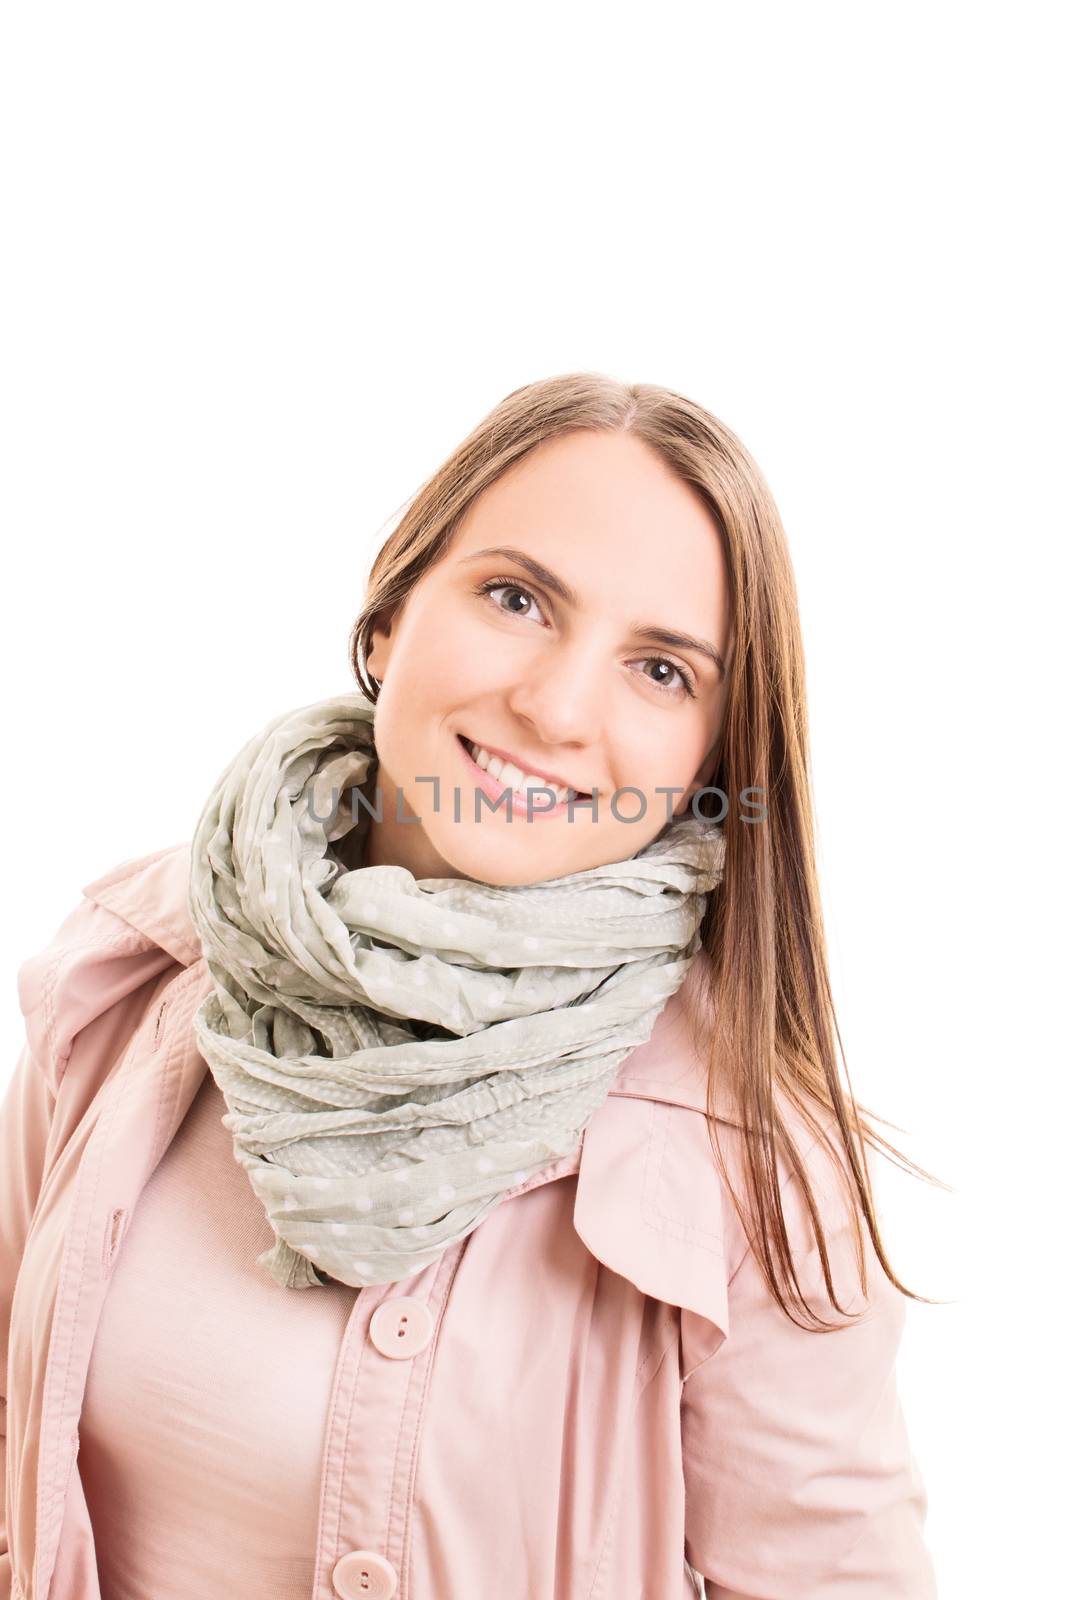 Portrait of a smiling beautiful young woman wearing a pink raincoat and a fashionable scarf, isolated on white background.